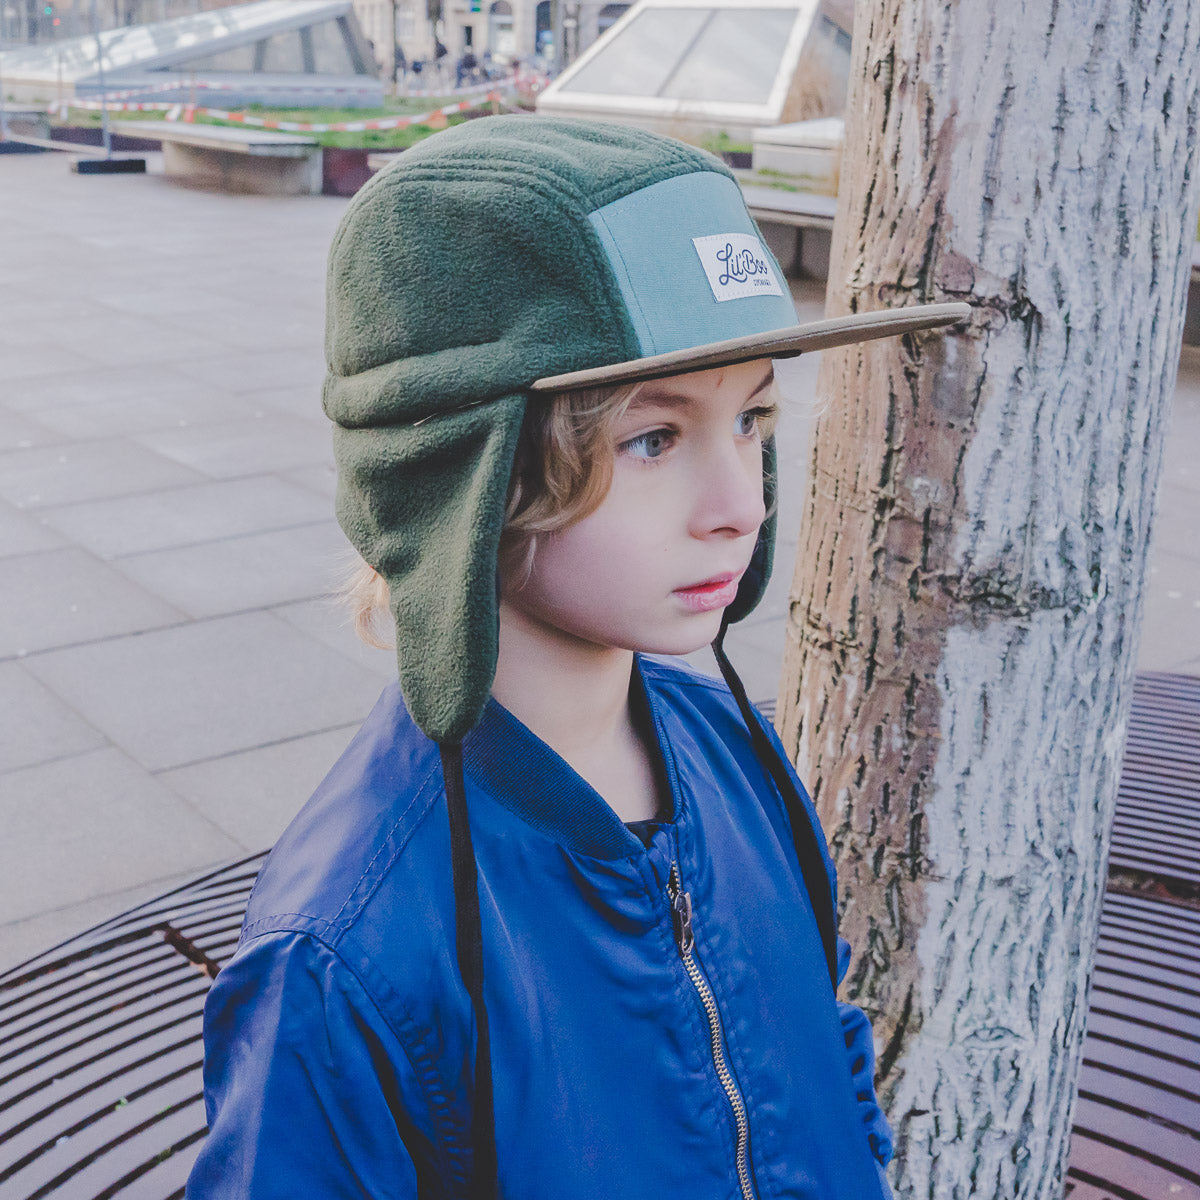 Lil'Boo Block Fleece 5 Panel with Ears - Forest Green